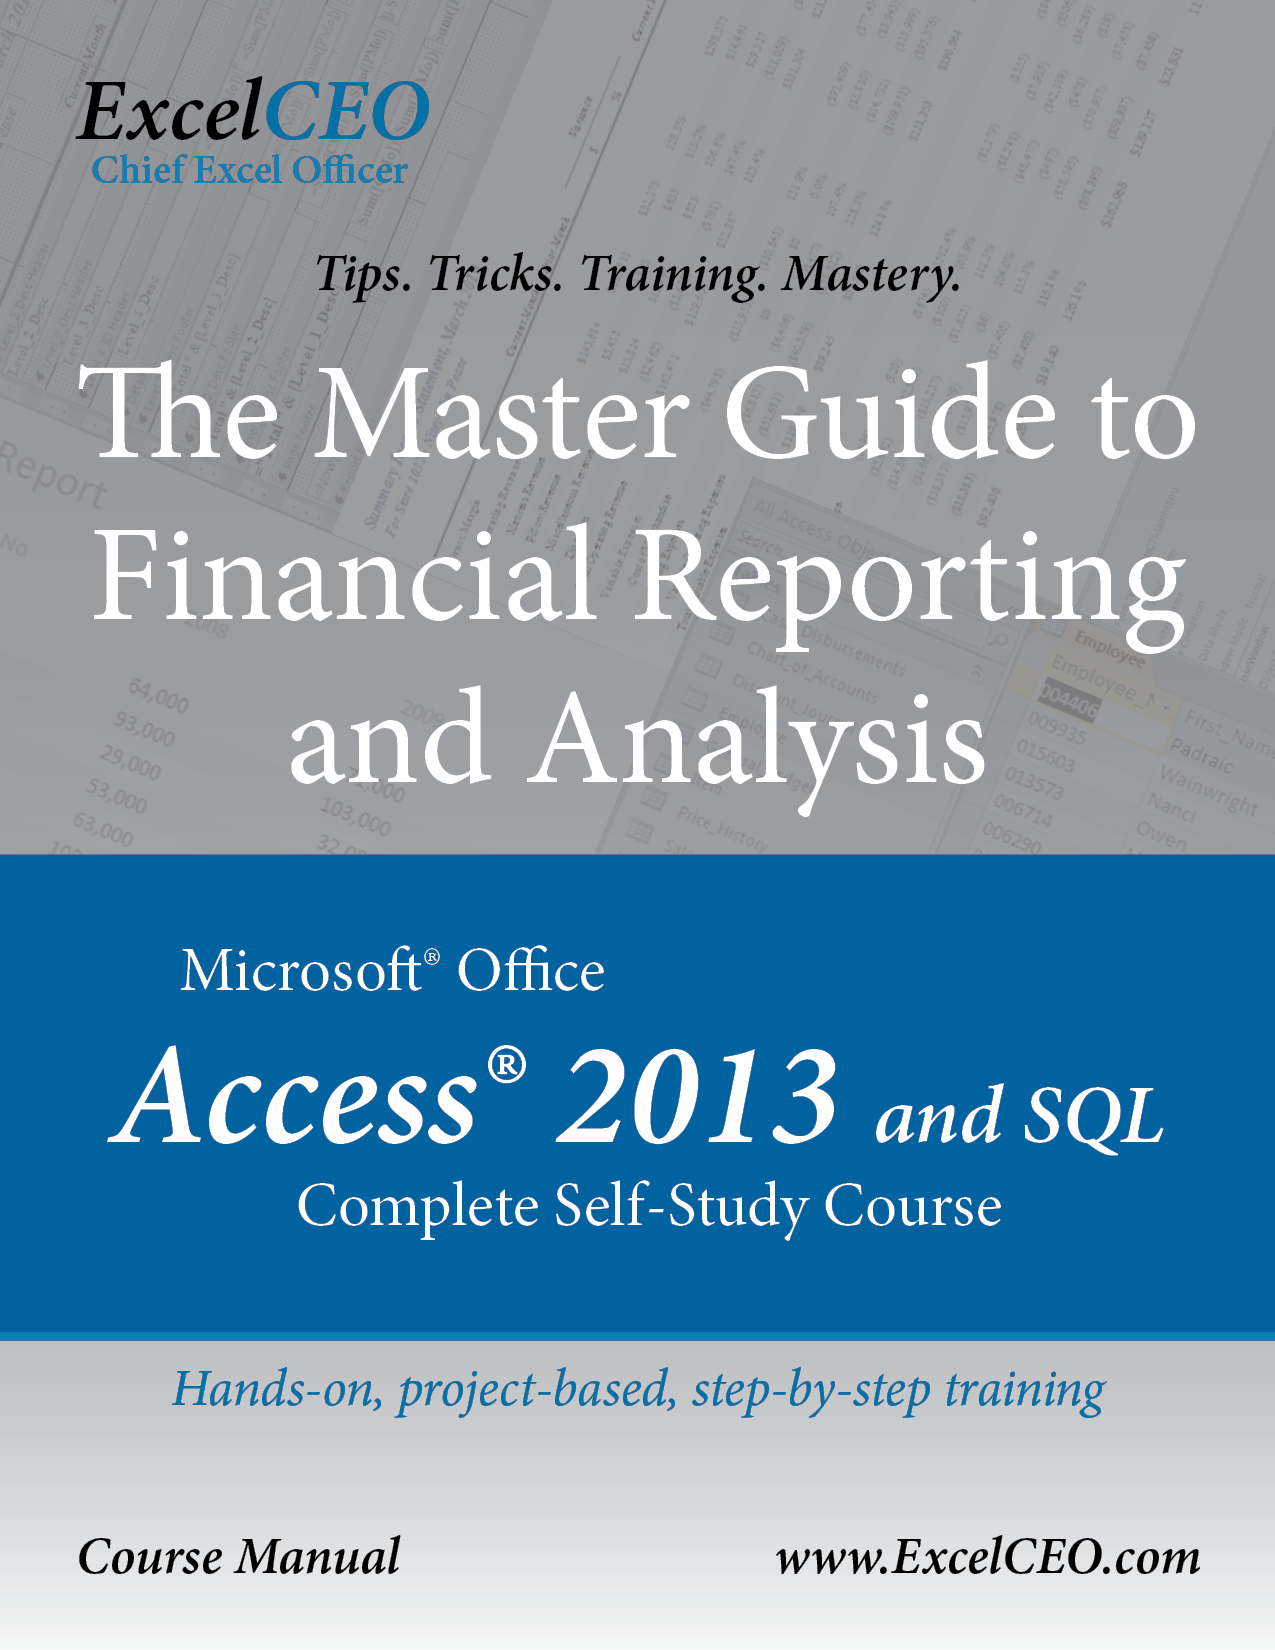 Access 2013 and SQL Manual Cover and Product Page Link